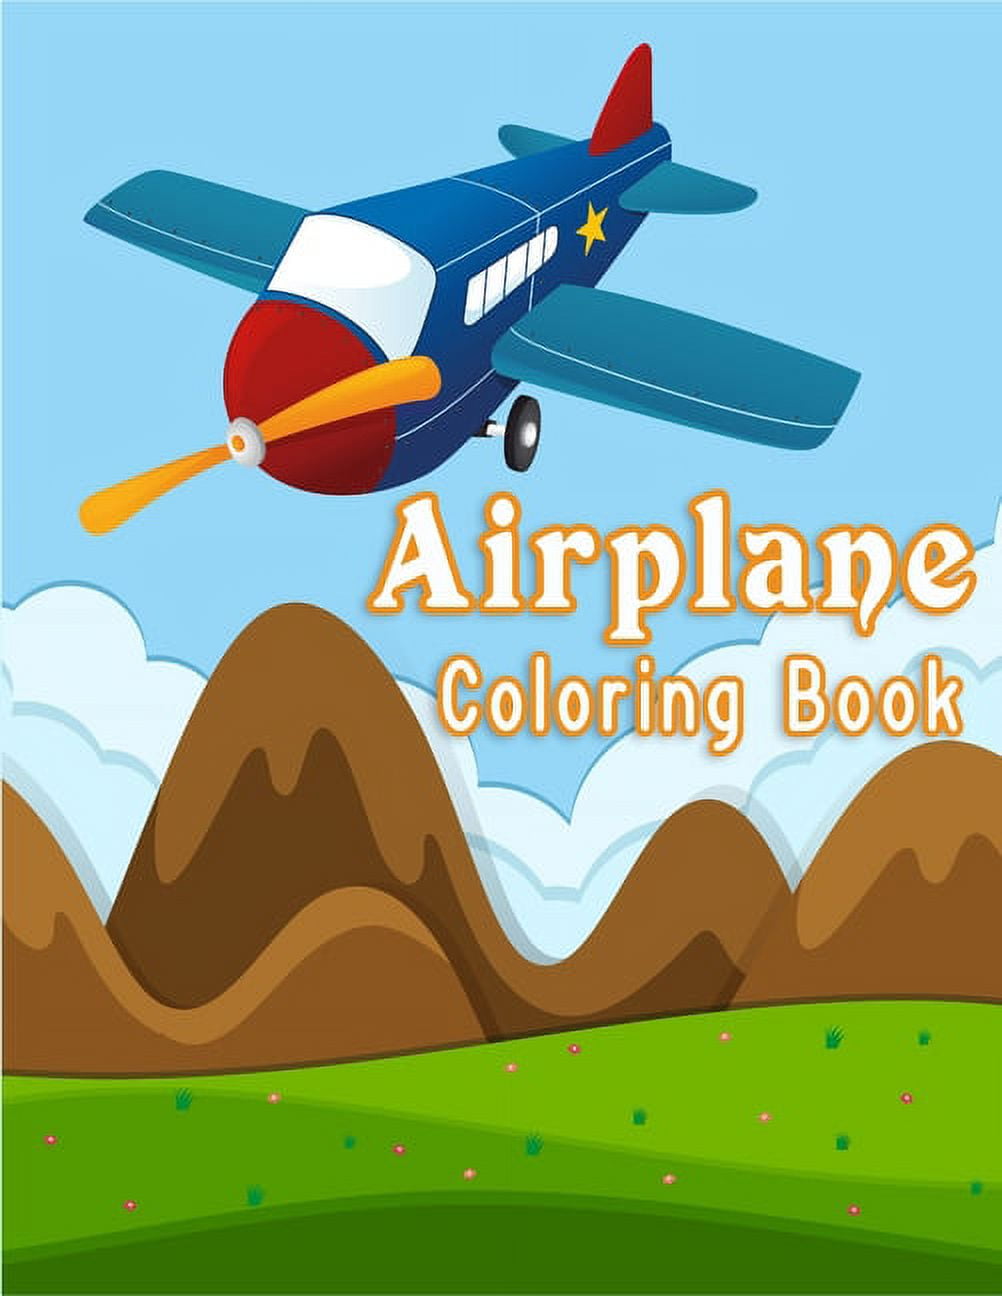 Stream [Ebook]$$ 💖 The Airplane Activity Book for Kids: 100 Flight  Activities To Do On Planes For Kids: P by BrileyAlison